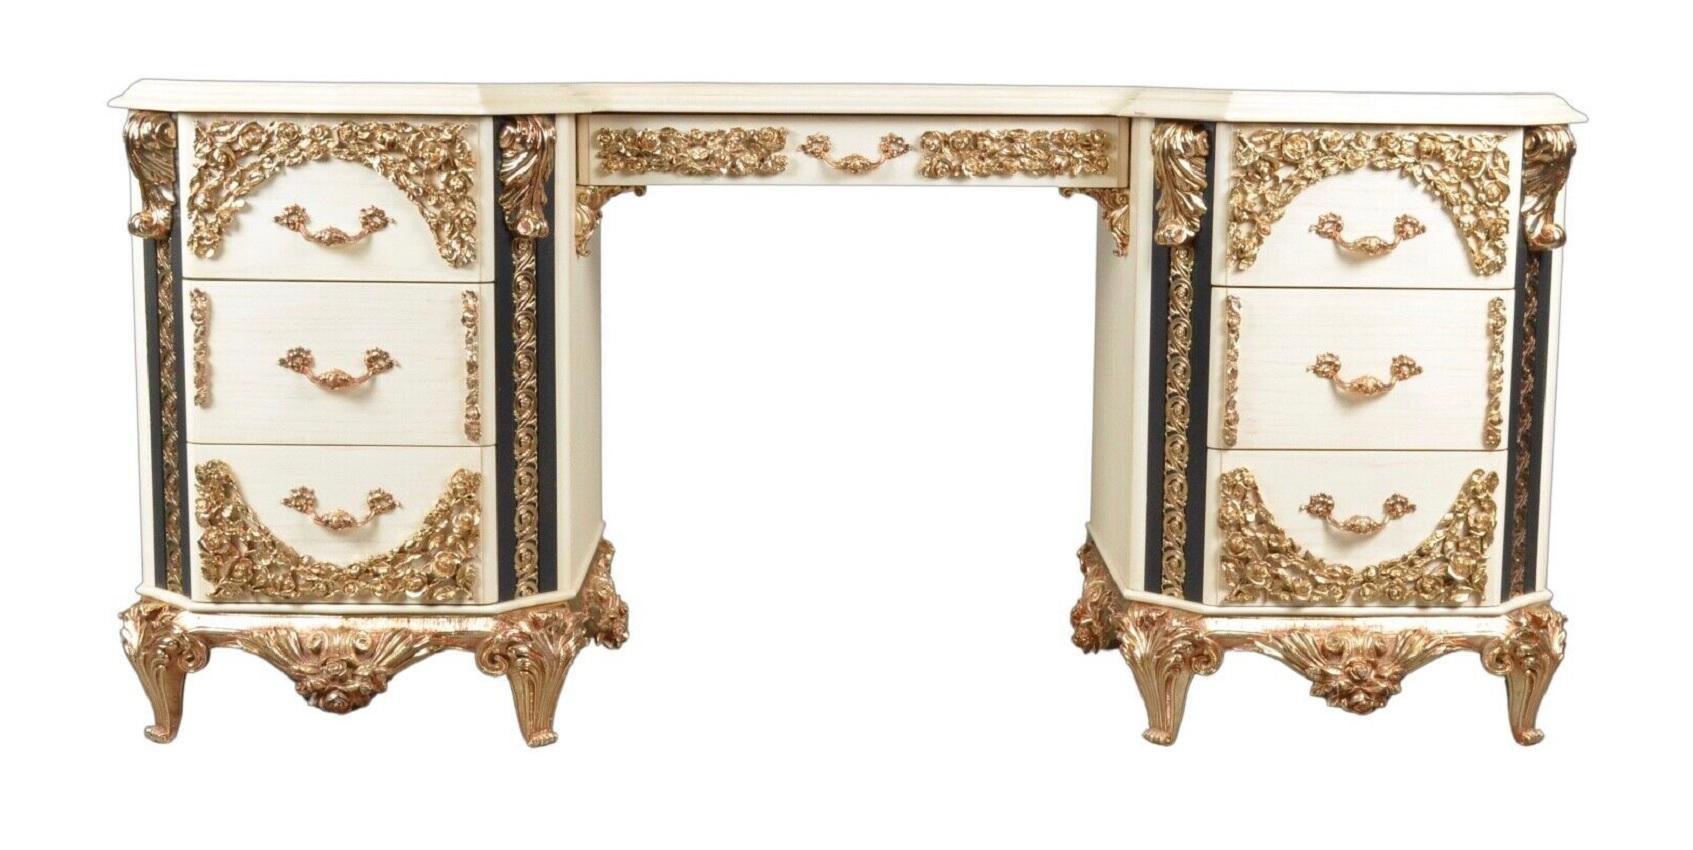 We are delighted to offer for sale this lovely rare circa 1970 rococo Vidal Grau dressing table.

Their furniture range was based on a contemporary design using traditional quality materials such as wood, metal, glass, marble, and other innovative